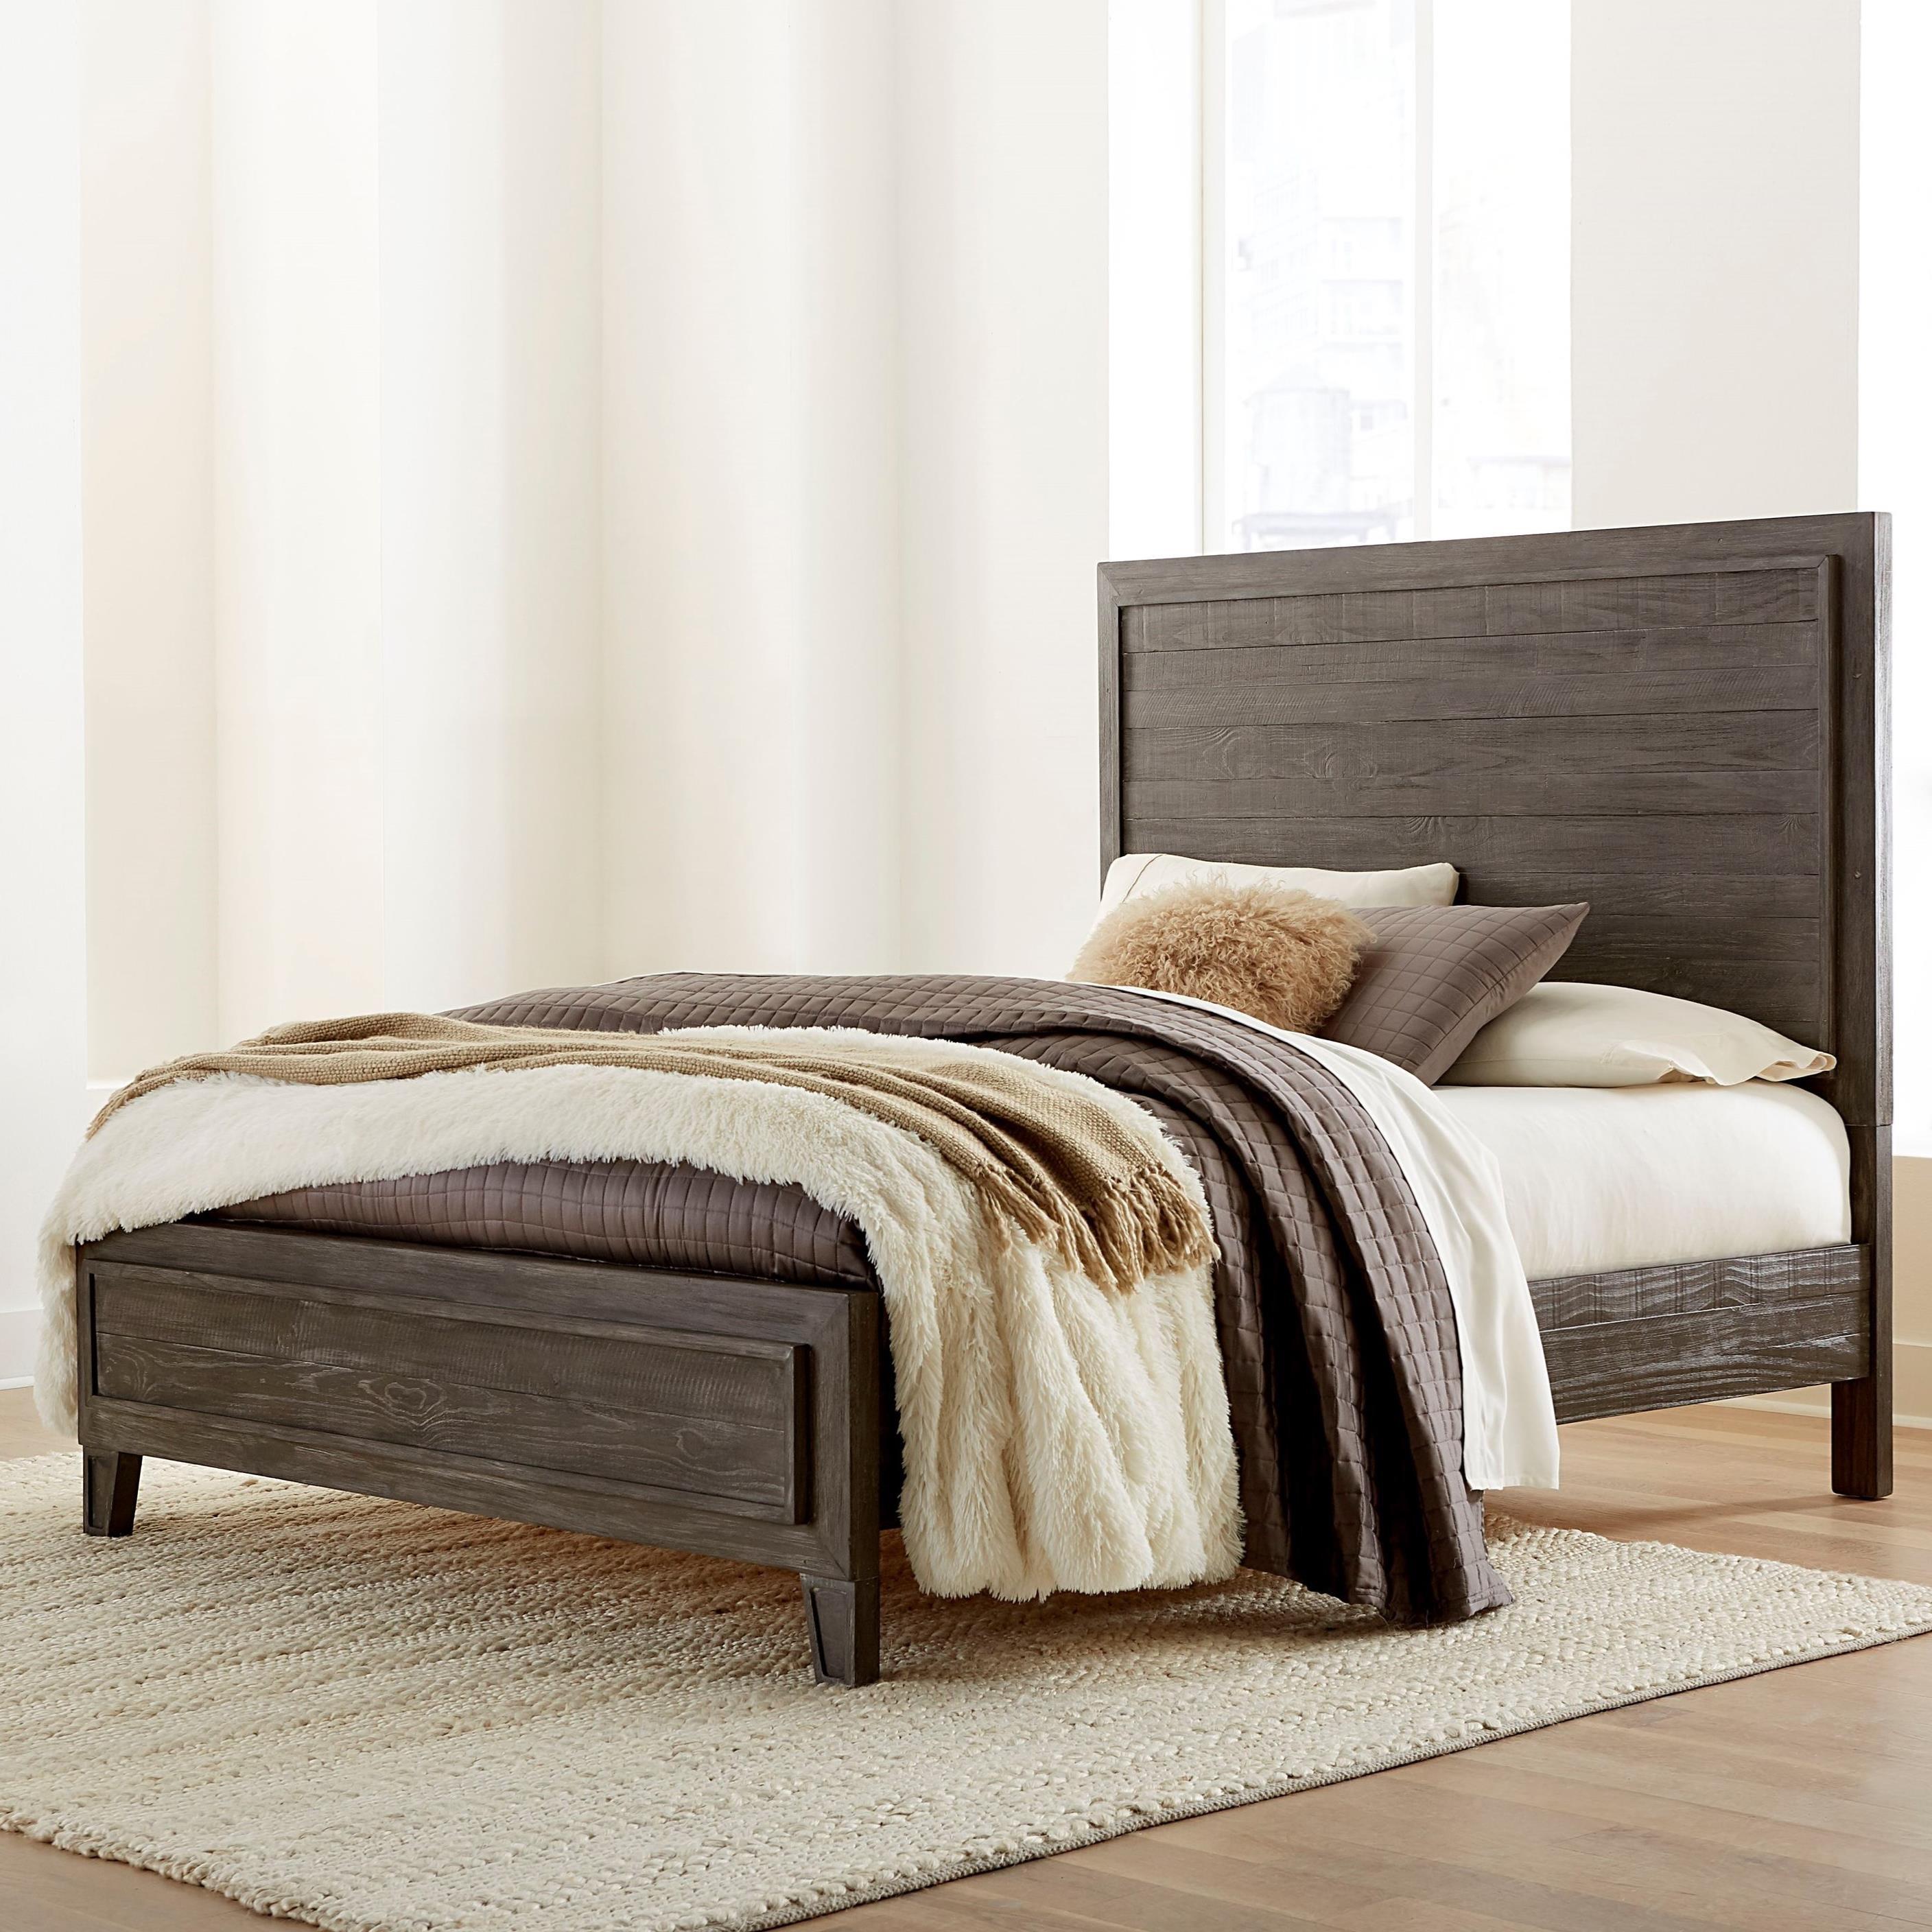 

    
Casual Rustic Style Onyx Finish Panel Queen Bed HADLEY by Modus Furniture
